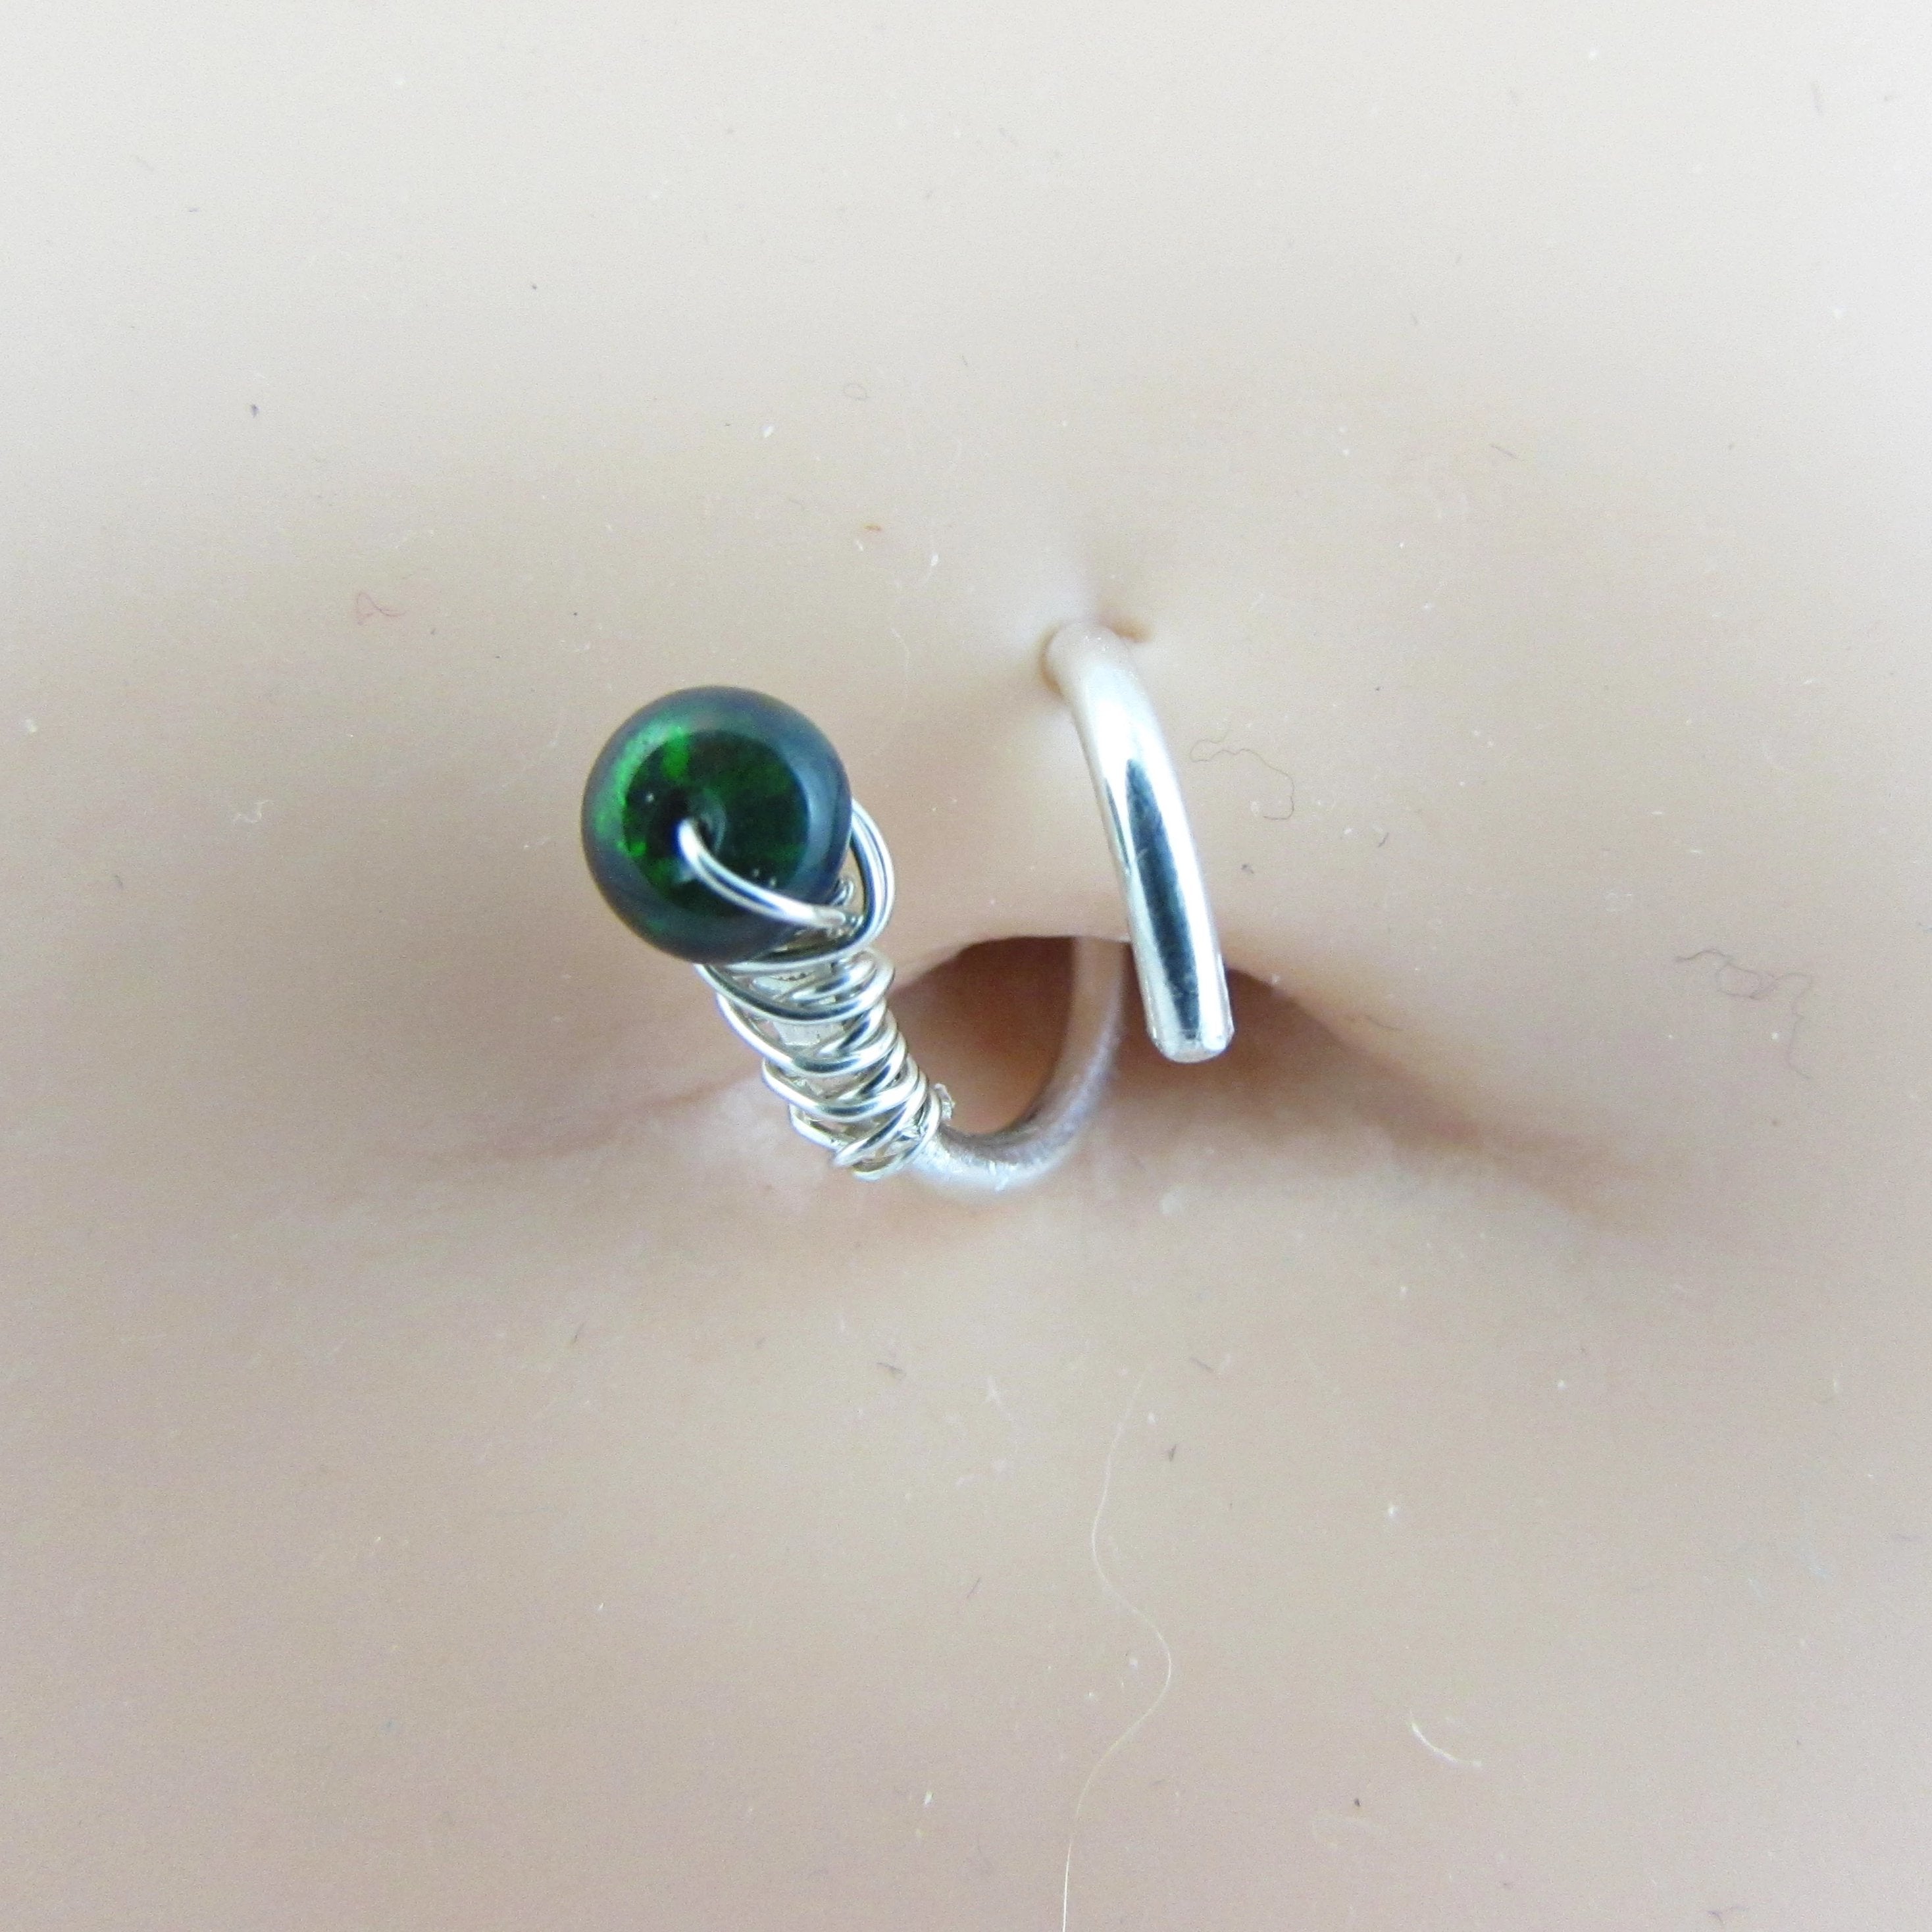 14k Palladium White Gold Spiral Belly Ring Opal Wrapped Stone - 18g 16g